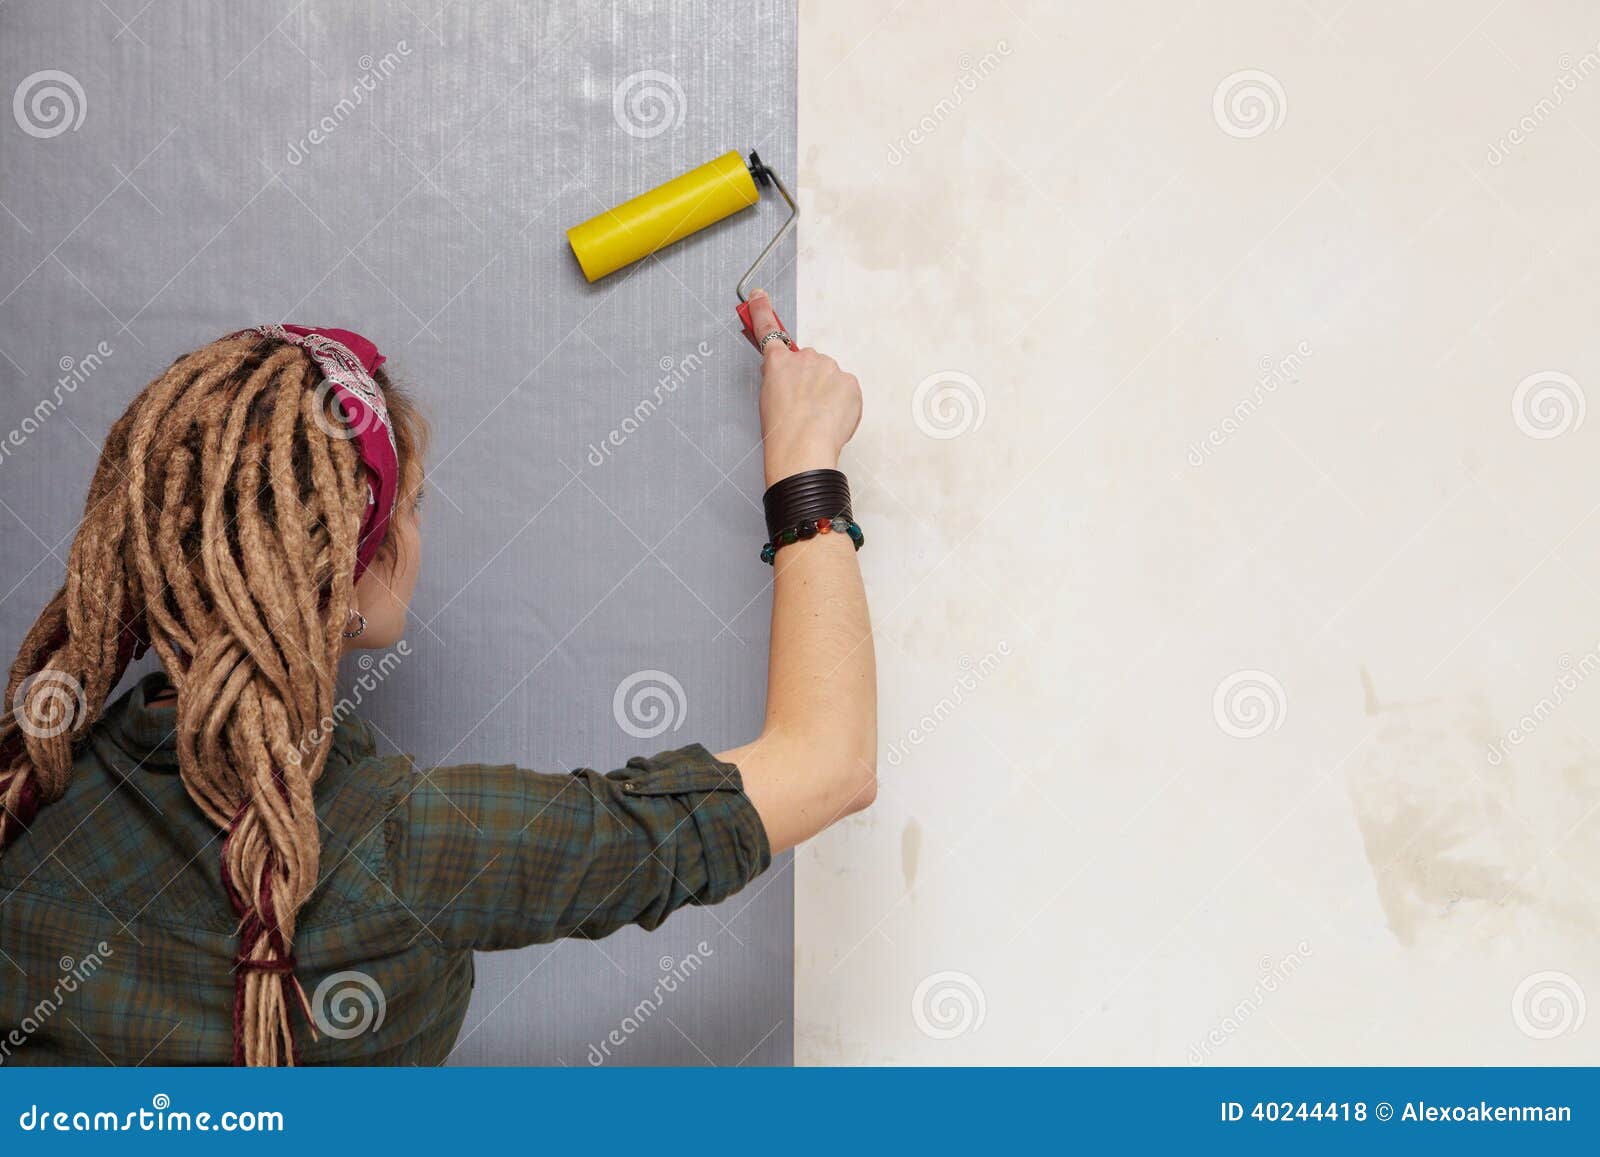 Young Woman Primed the Wall. Stock Photo - Image of people, woman: 40244418